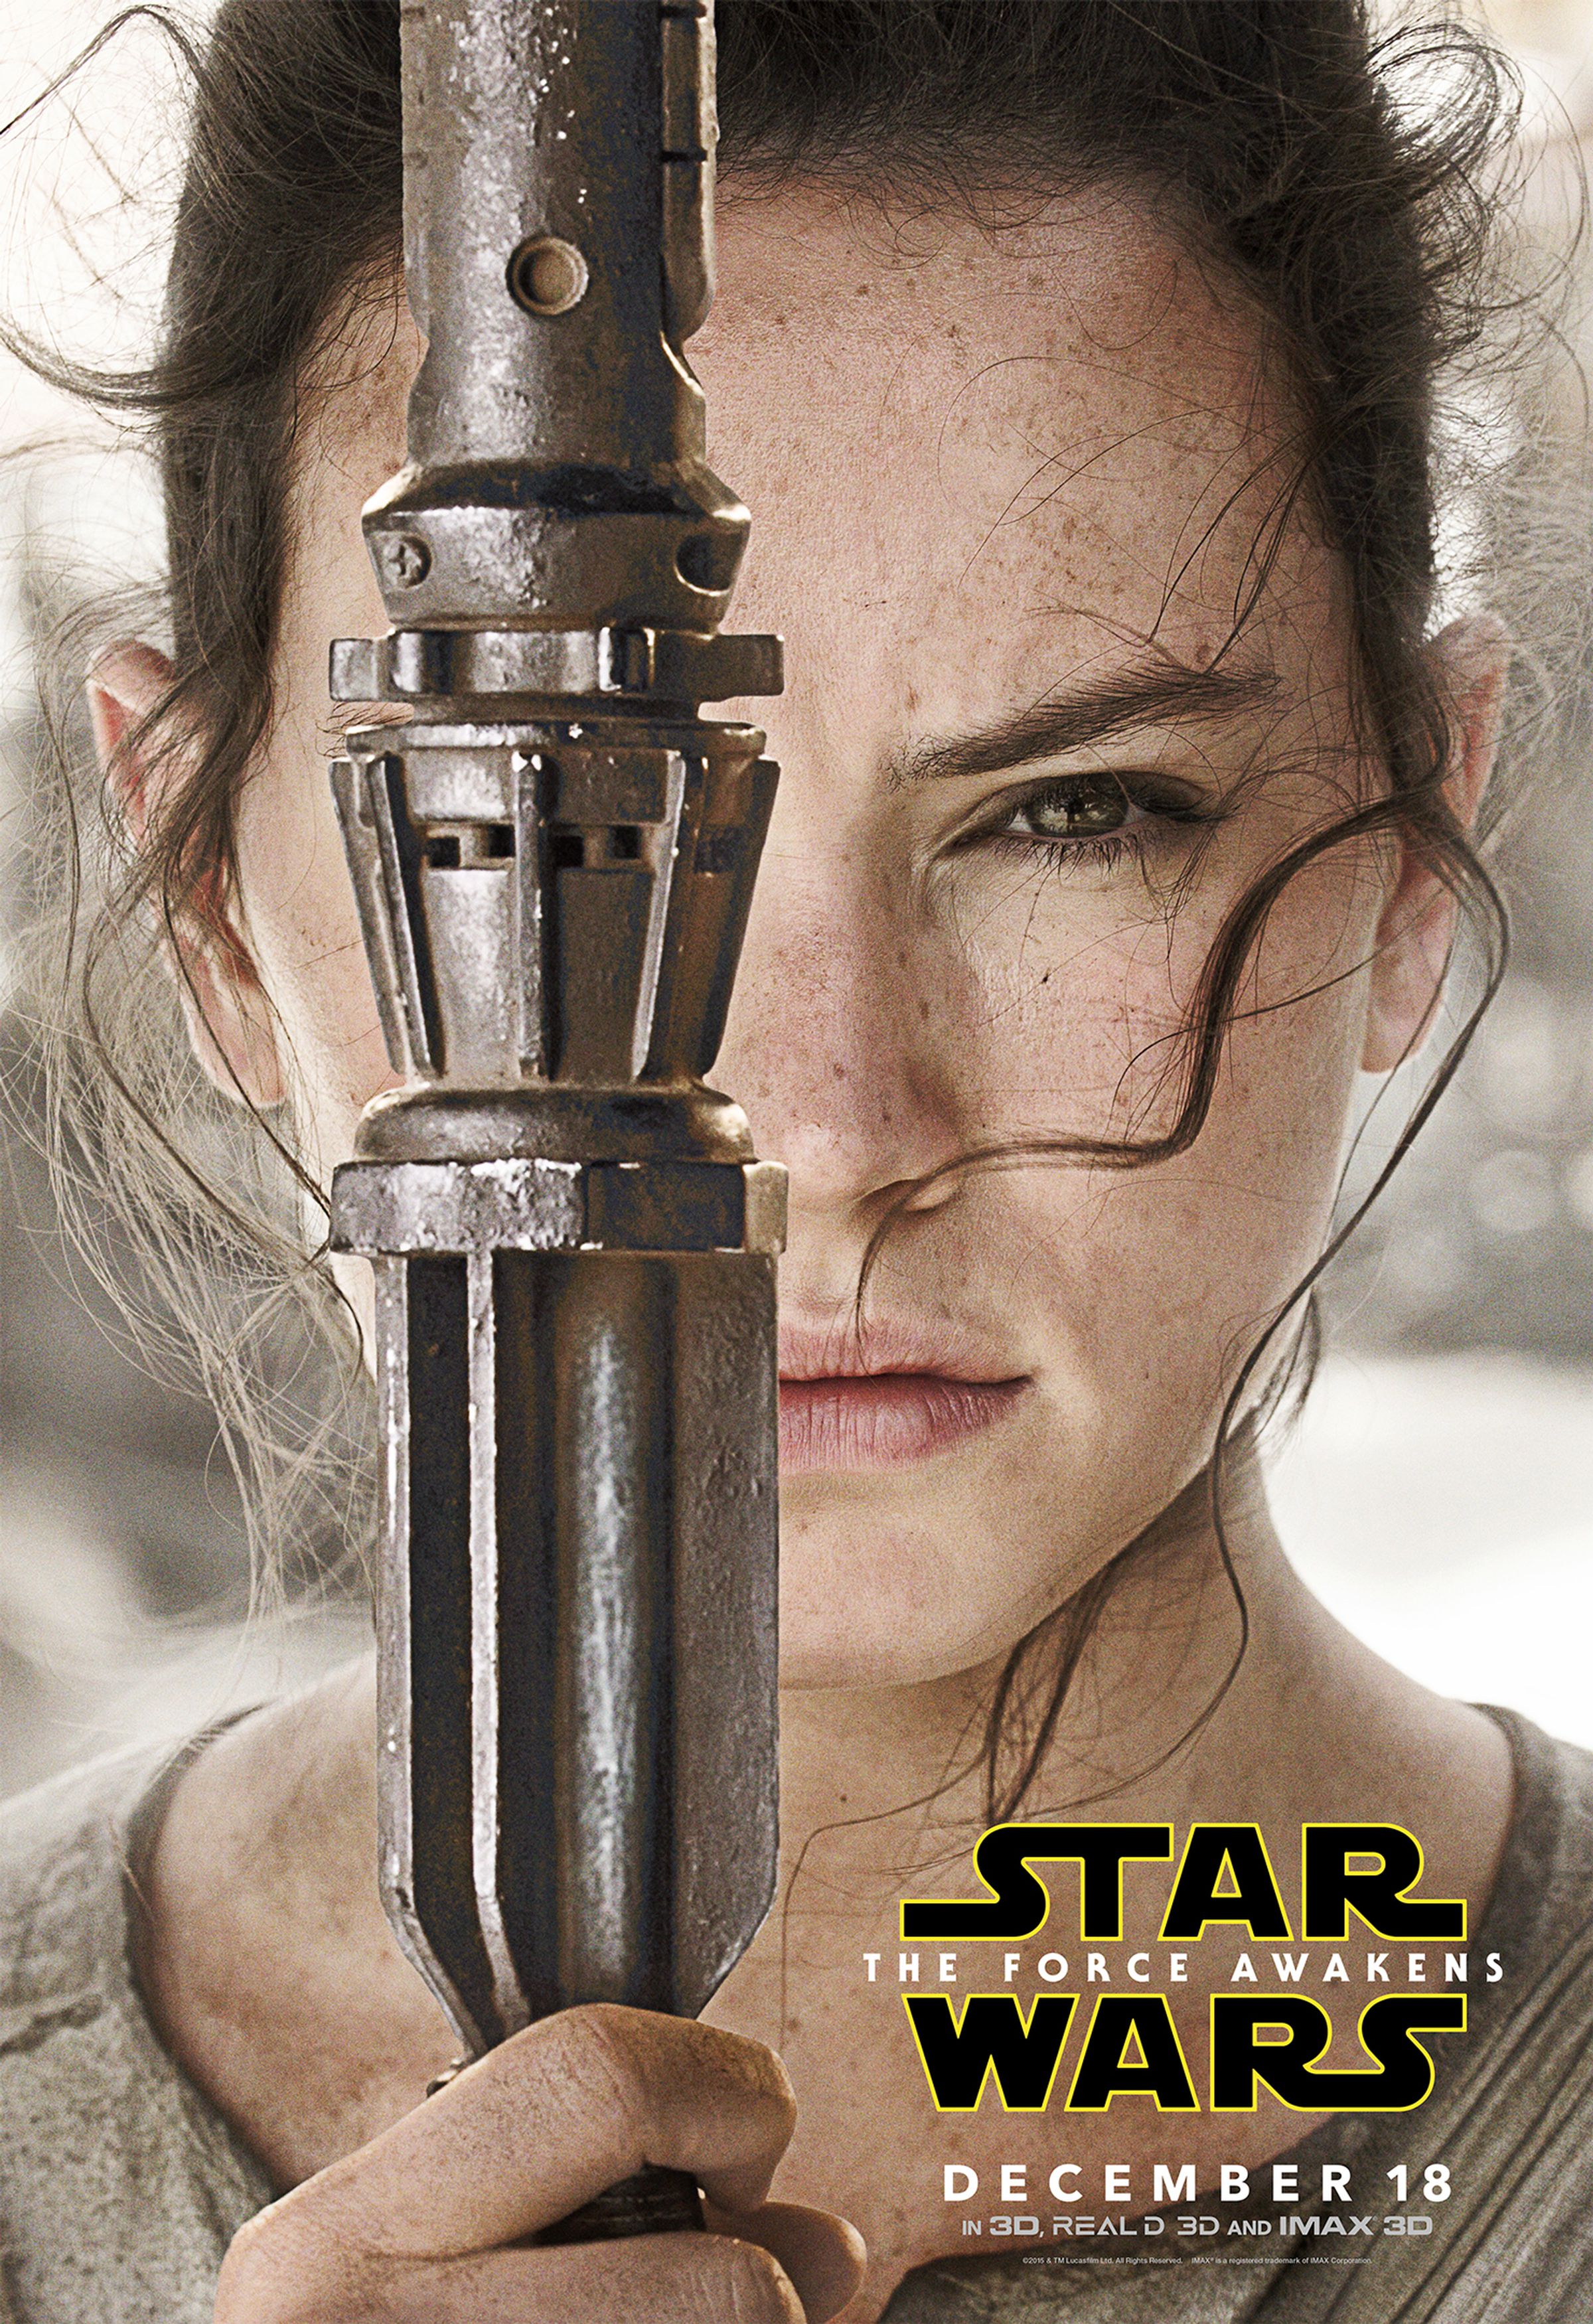 Star Wars: The Force Awakens character posters